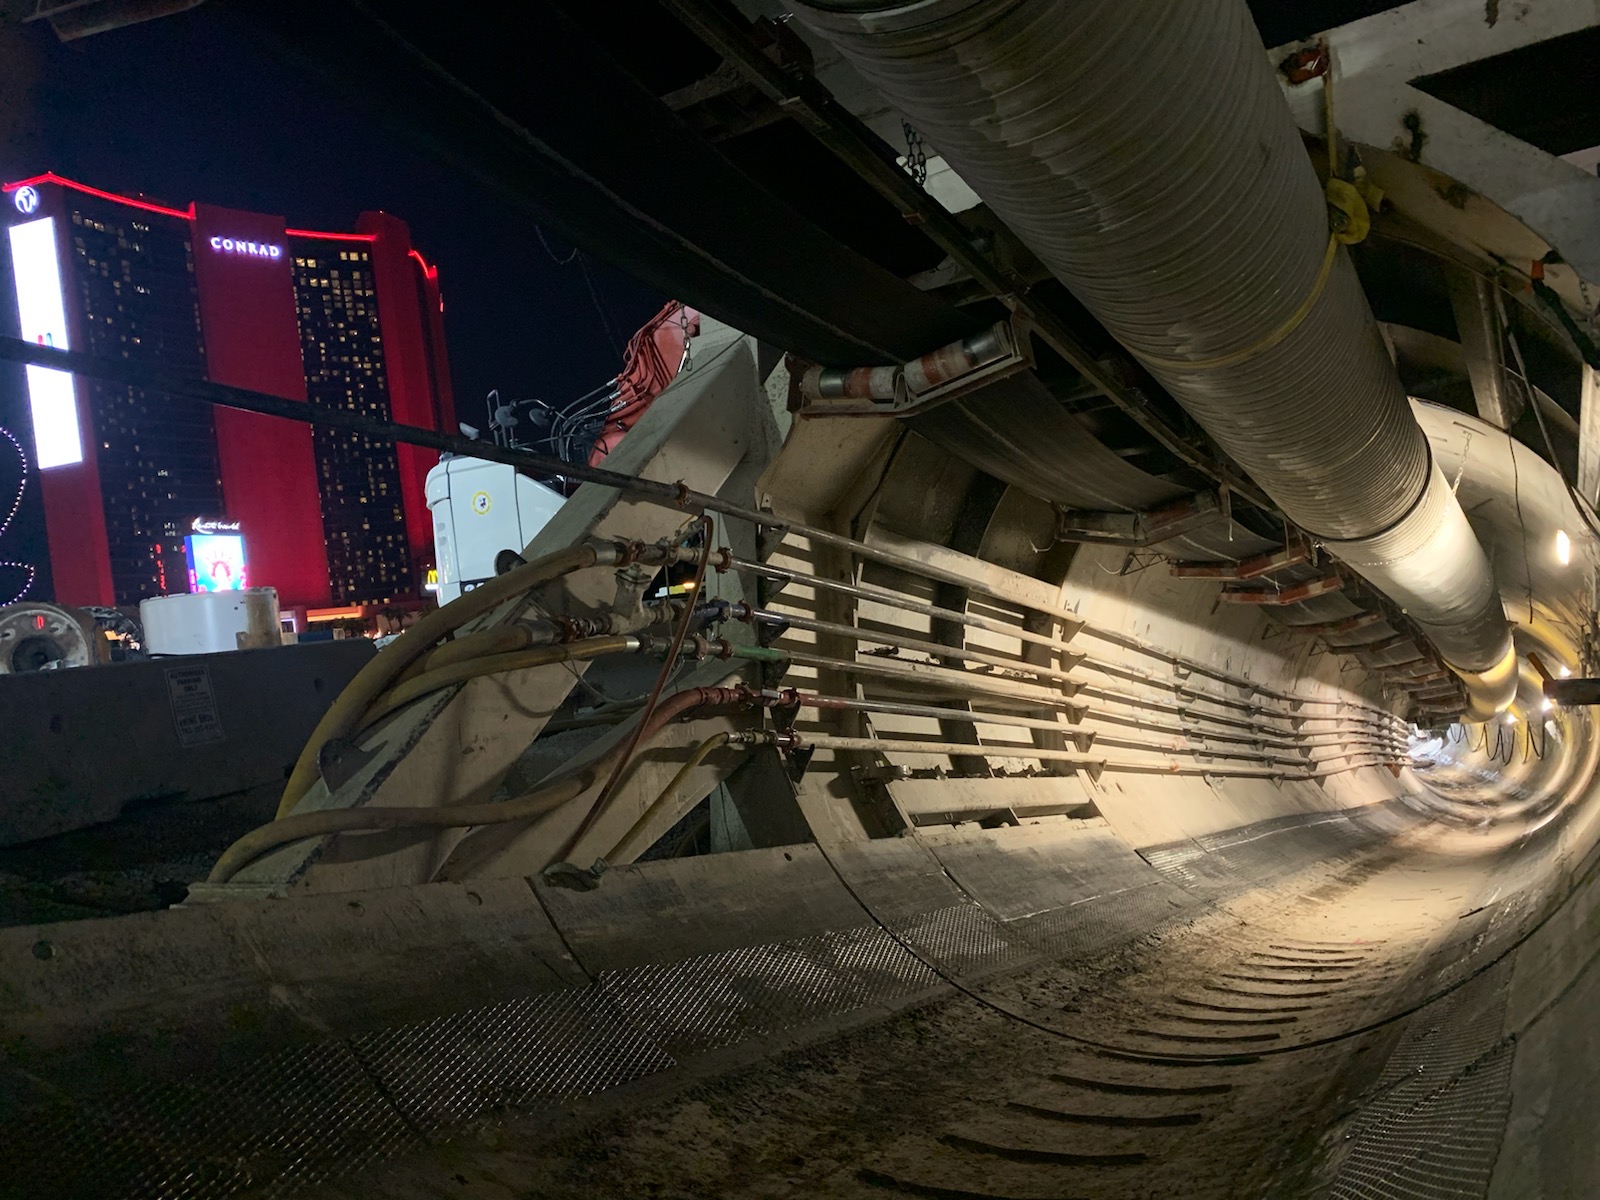 The Boring Company shares sneak peek of Prufrock-1 constructing the Vegas Loop Resorts World exit